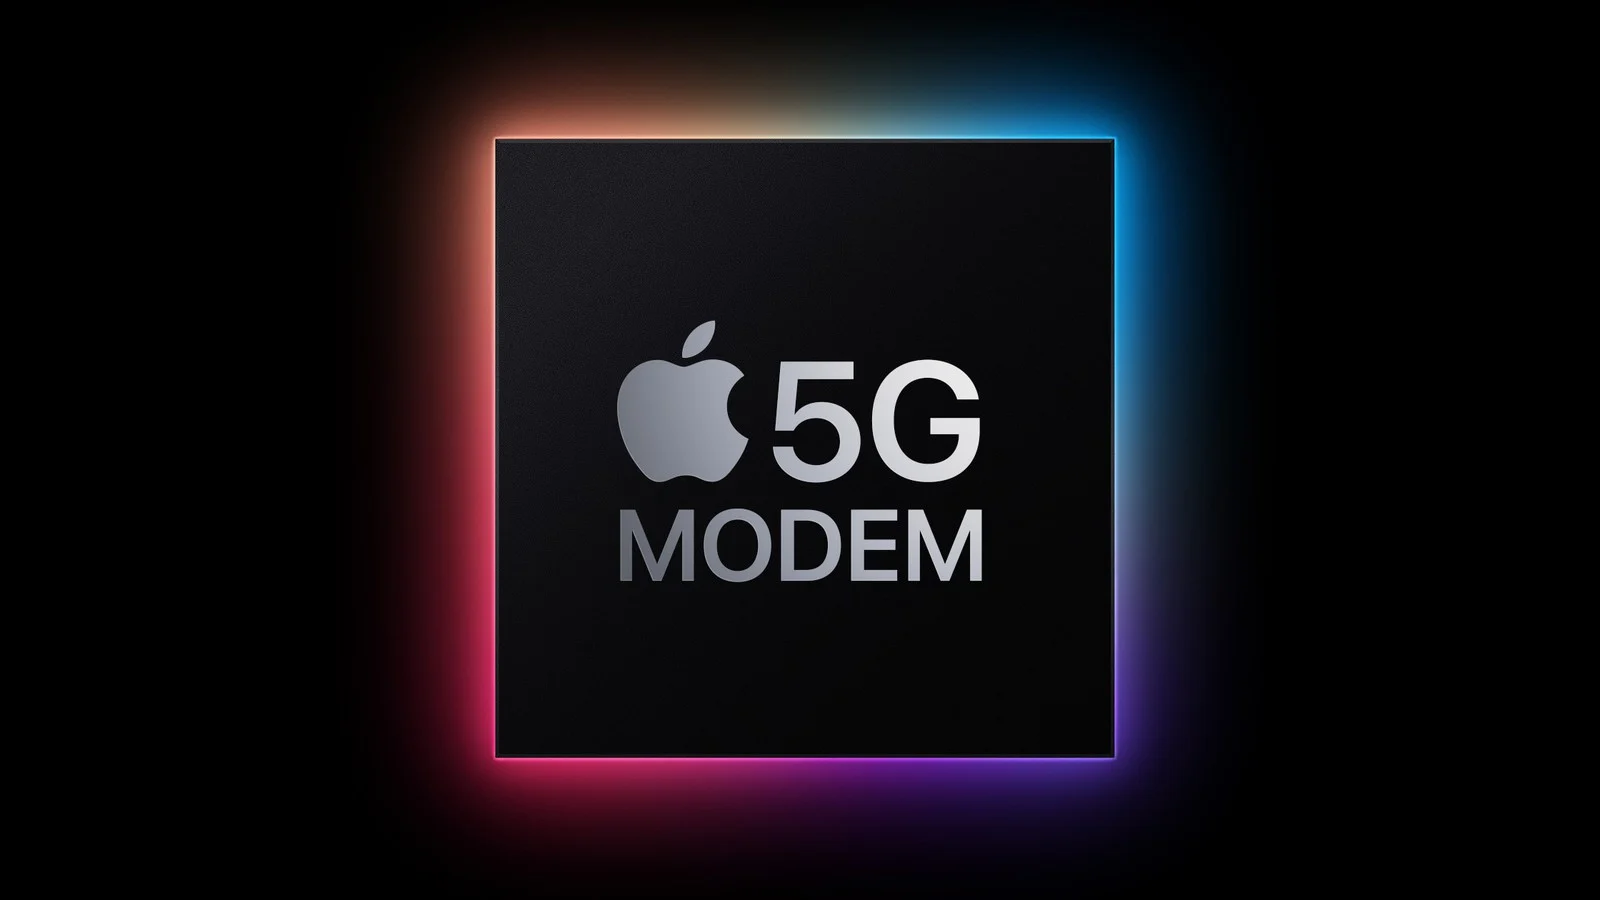 Apple's 5G Modem: Launch Date, What to Expect?